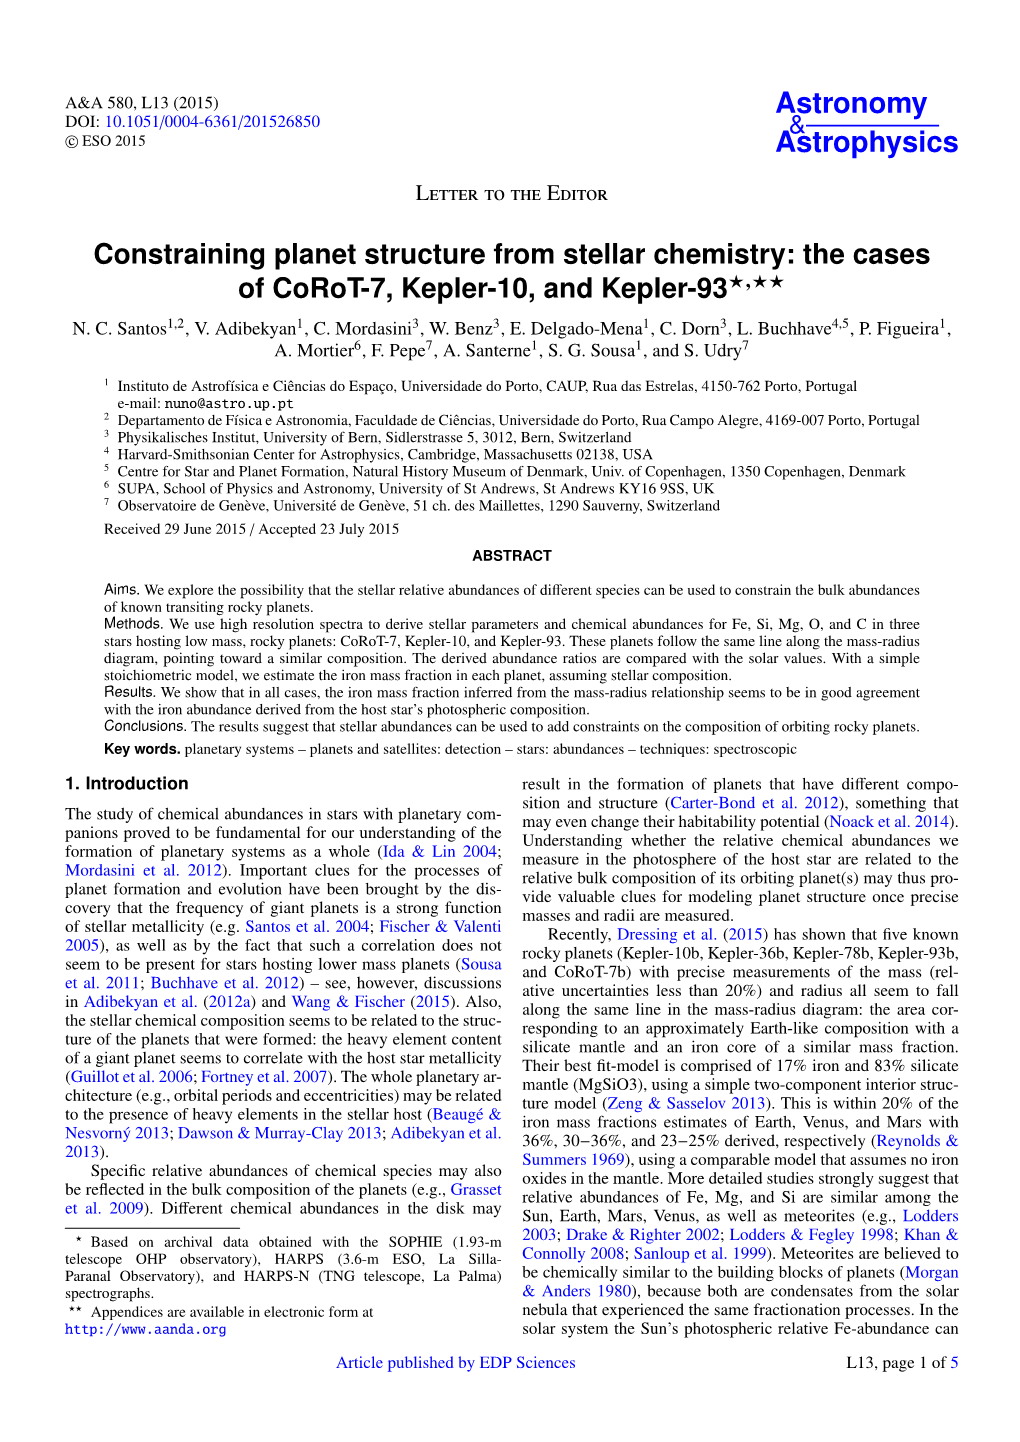 Constraining Planet Structure from Stellar Chemistry: the Cases of Corot-7, Kepler-10, and Kepler-93?,?? N